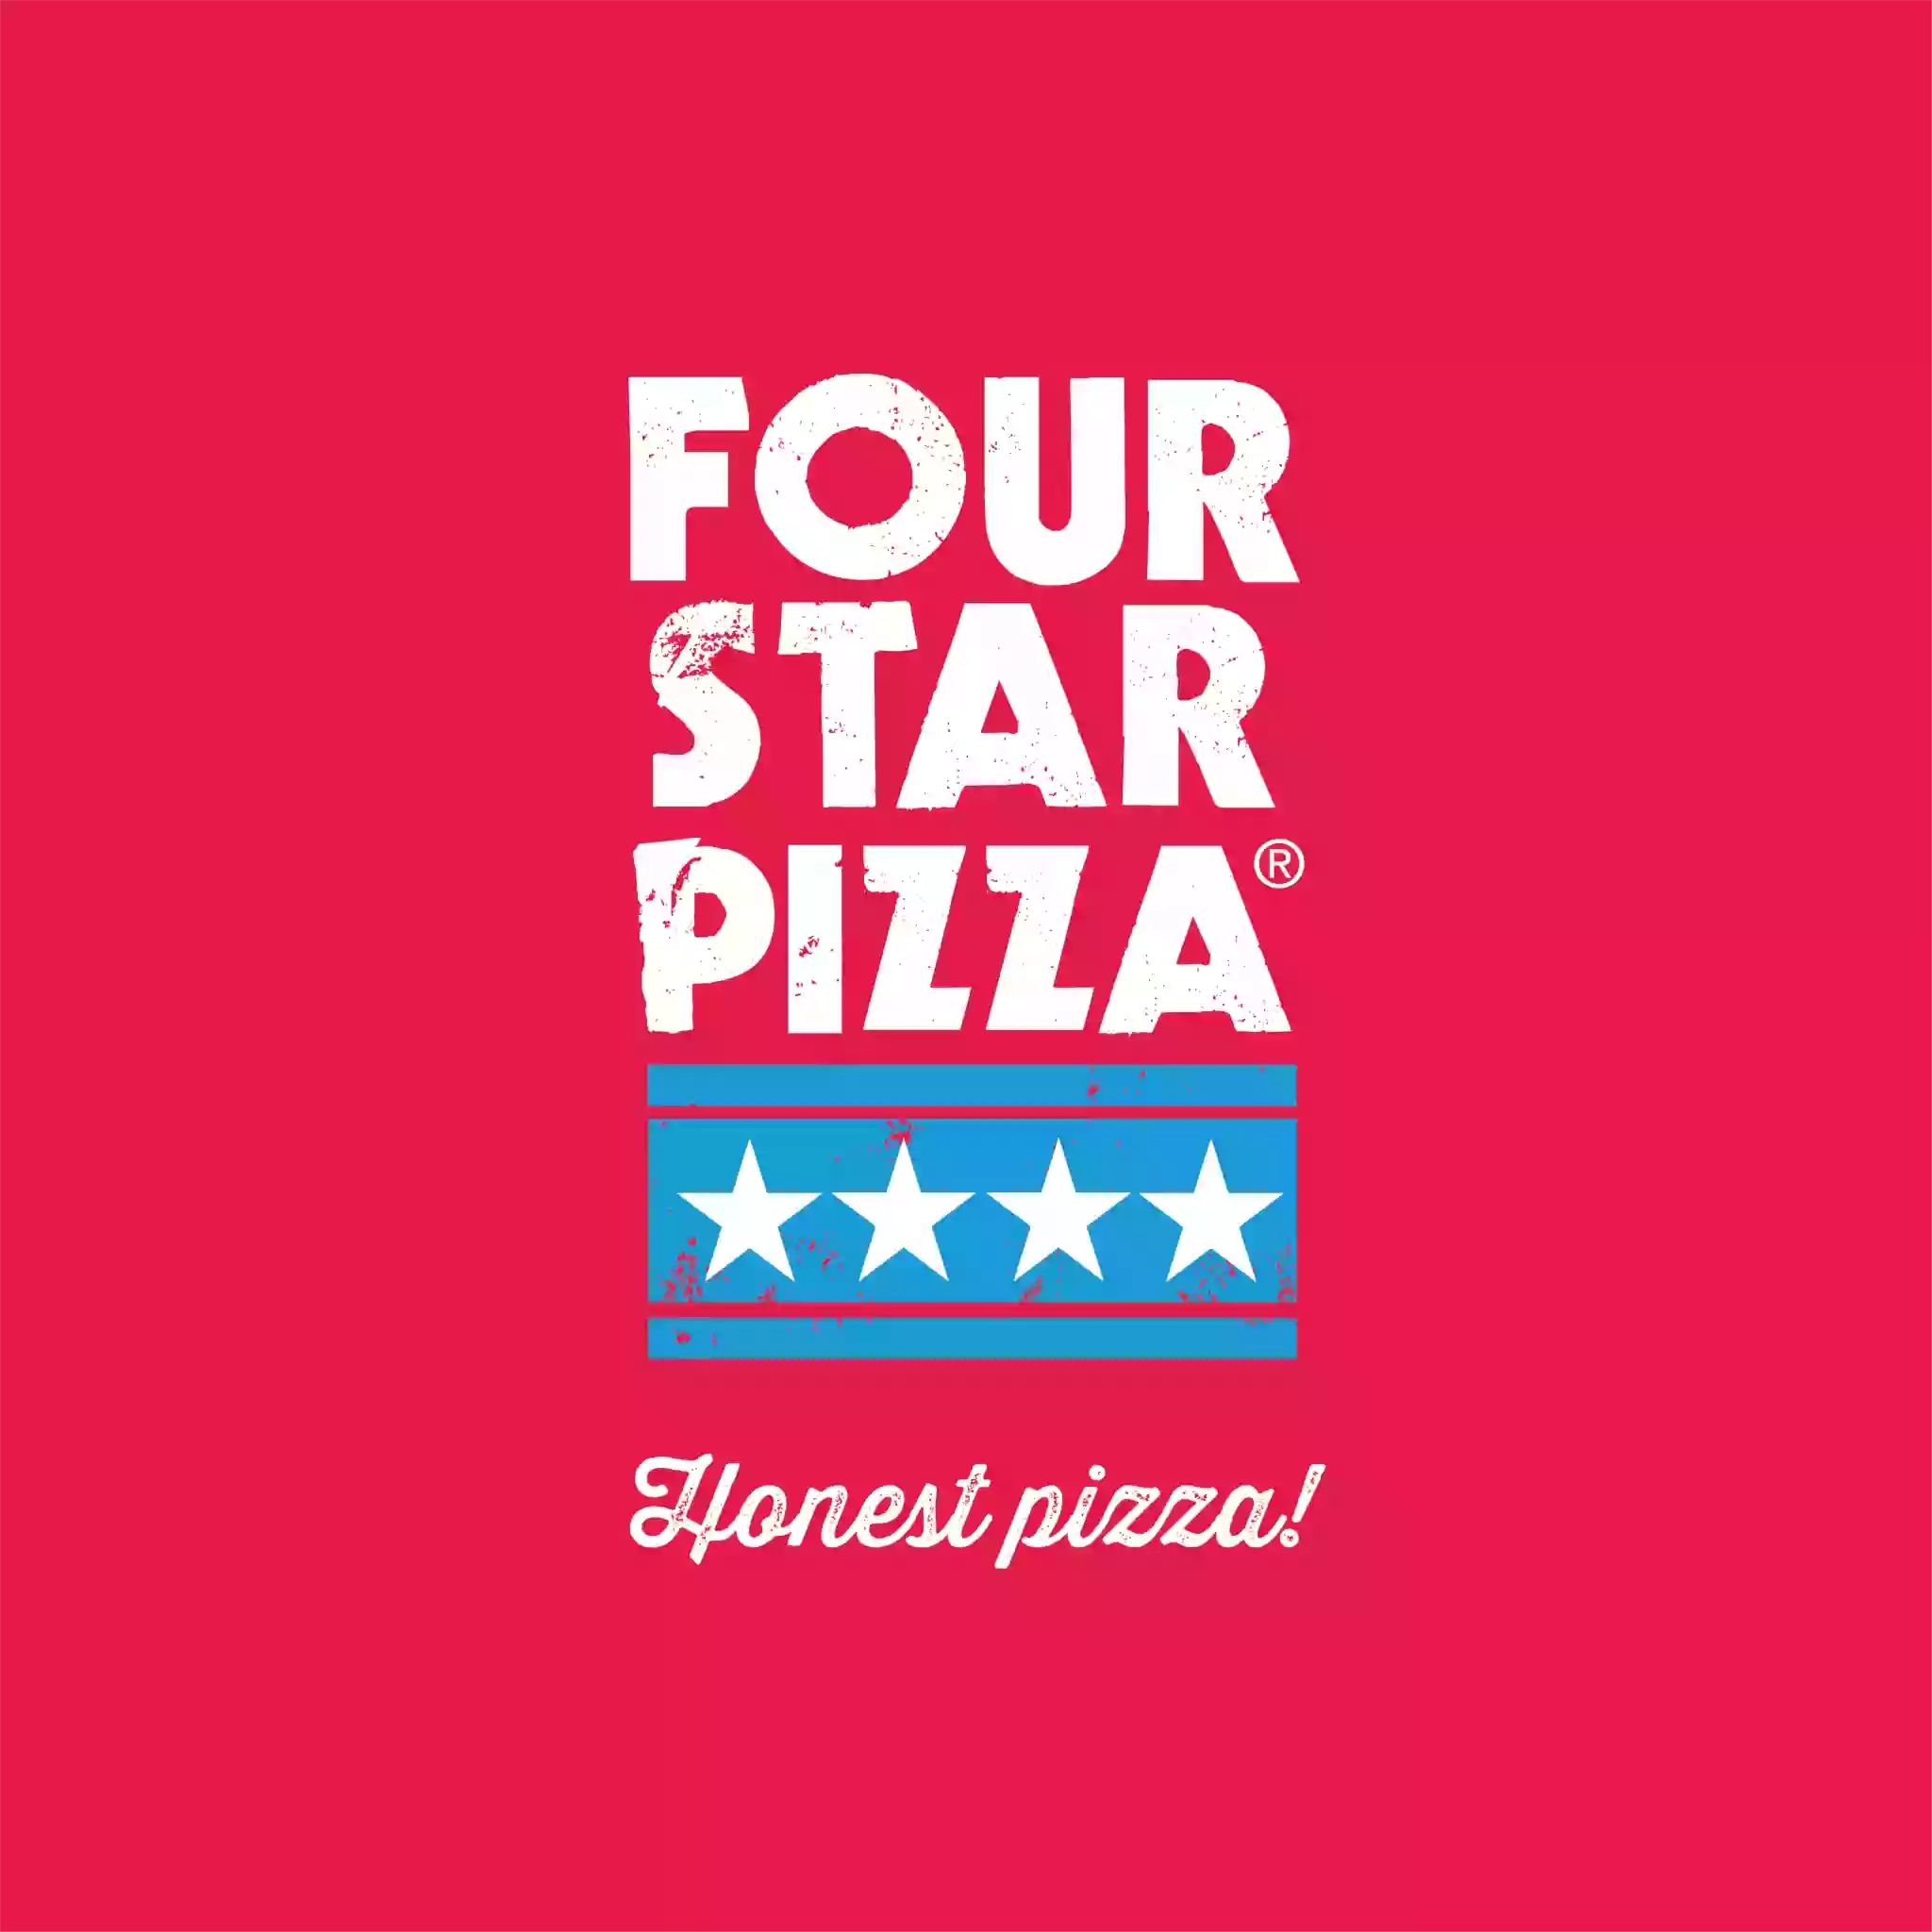 Four Star Pizza South Belfast